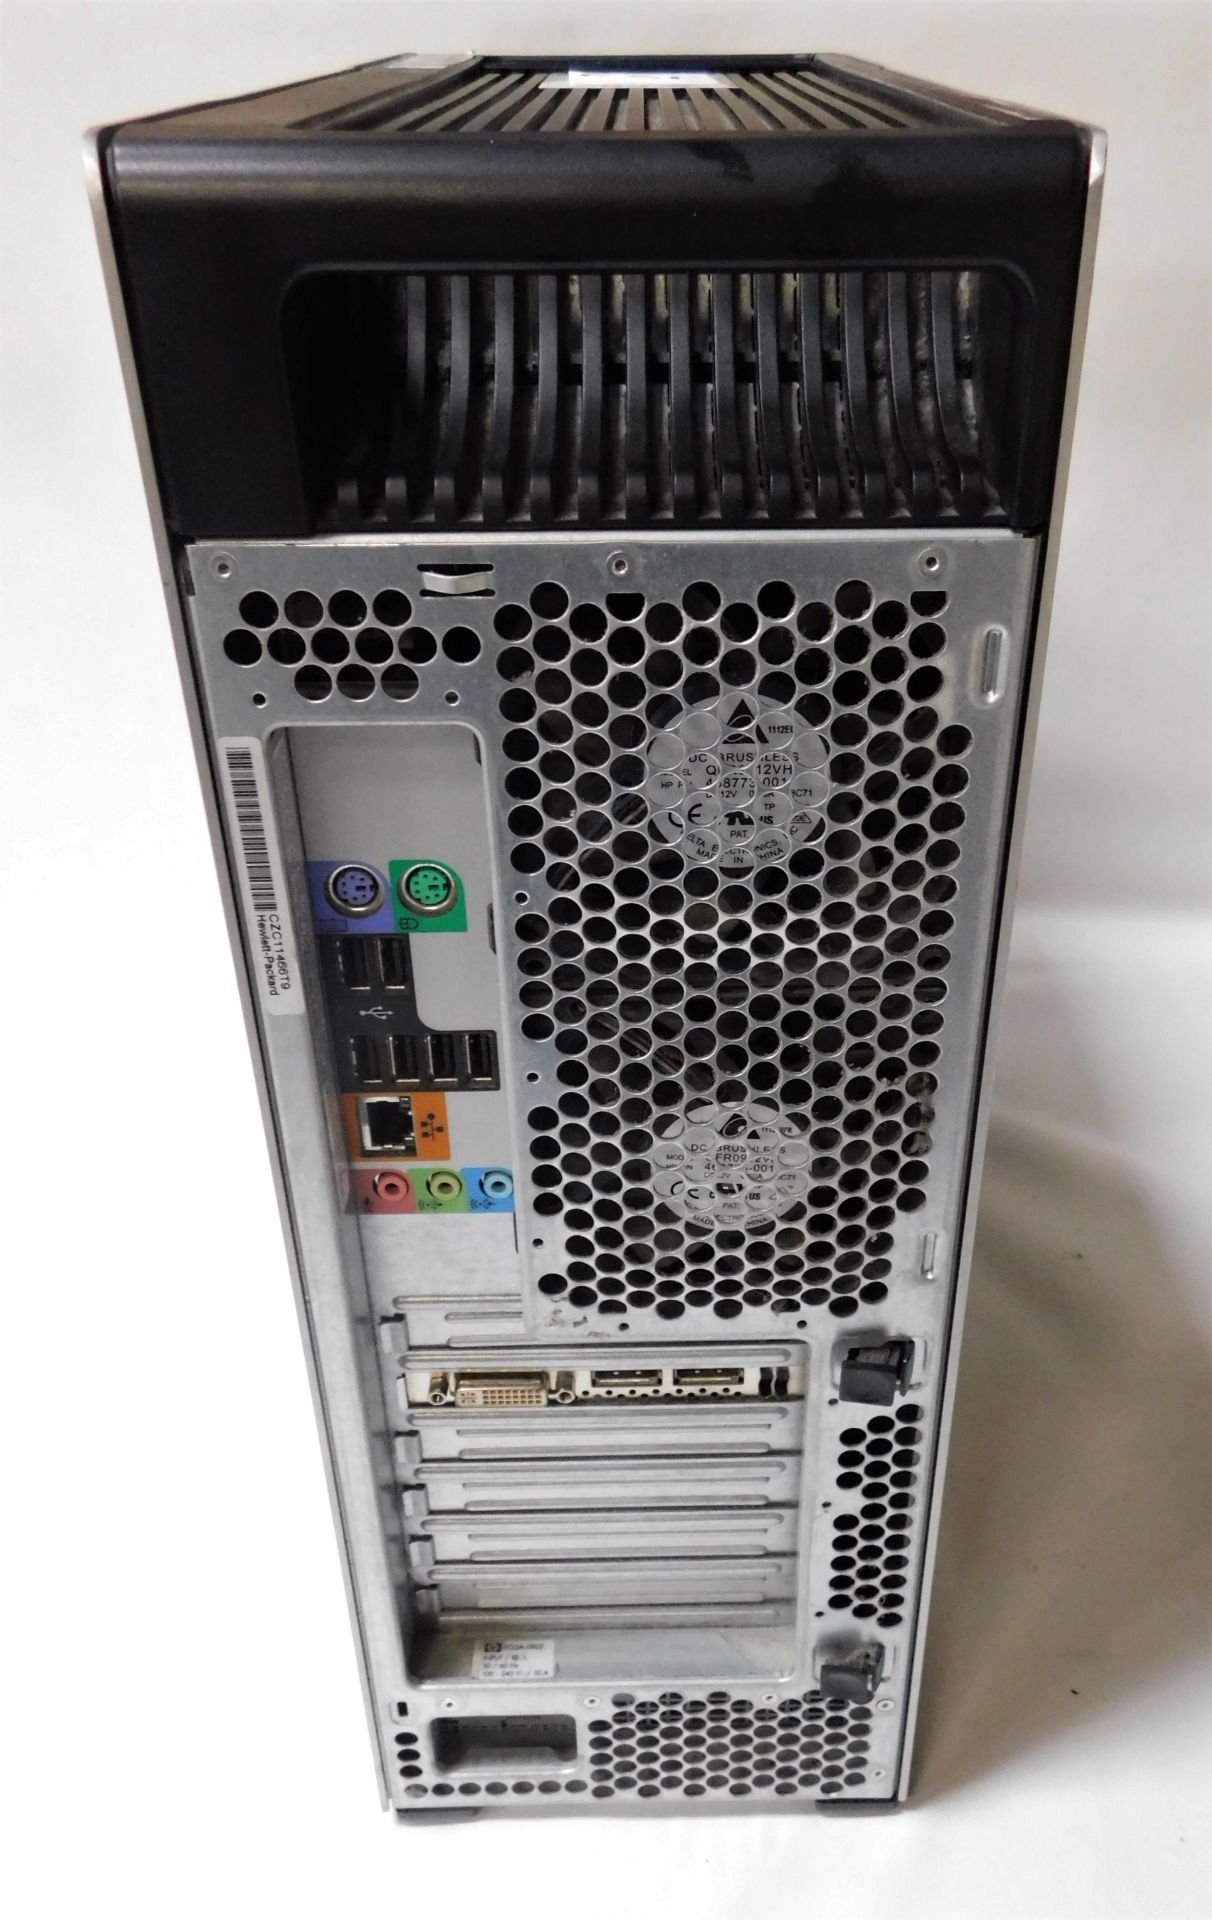 HP Z600 Xeon CPU X5650 Workstation, 2.67 GHz with 48 GB RAM & Quadro 4000 Video Card (Location - Image 3 of 3